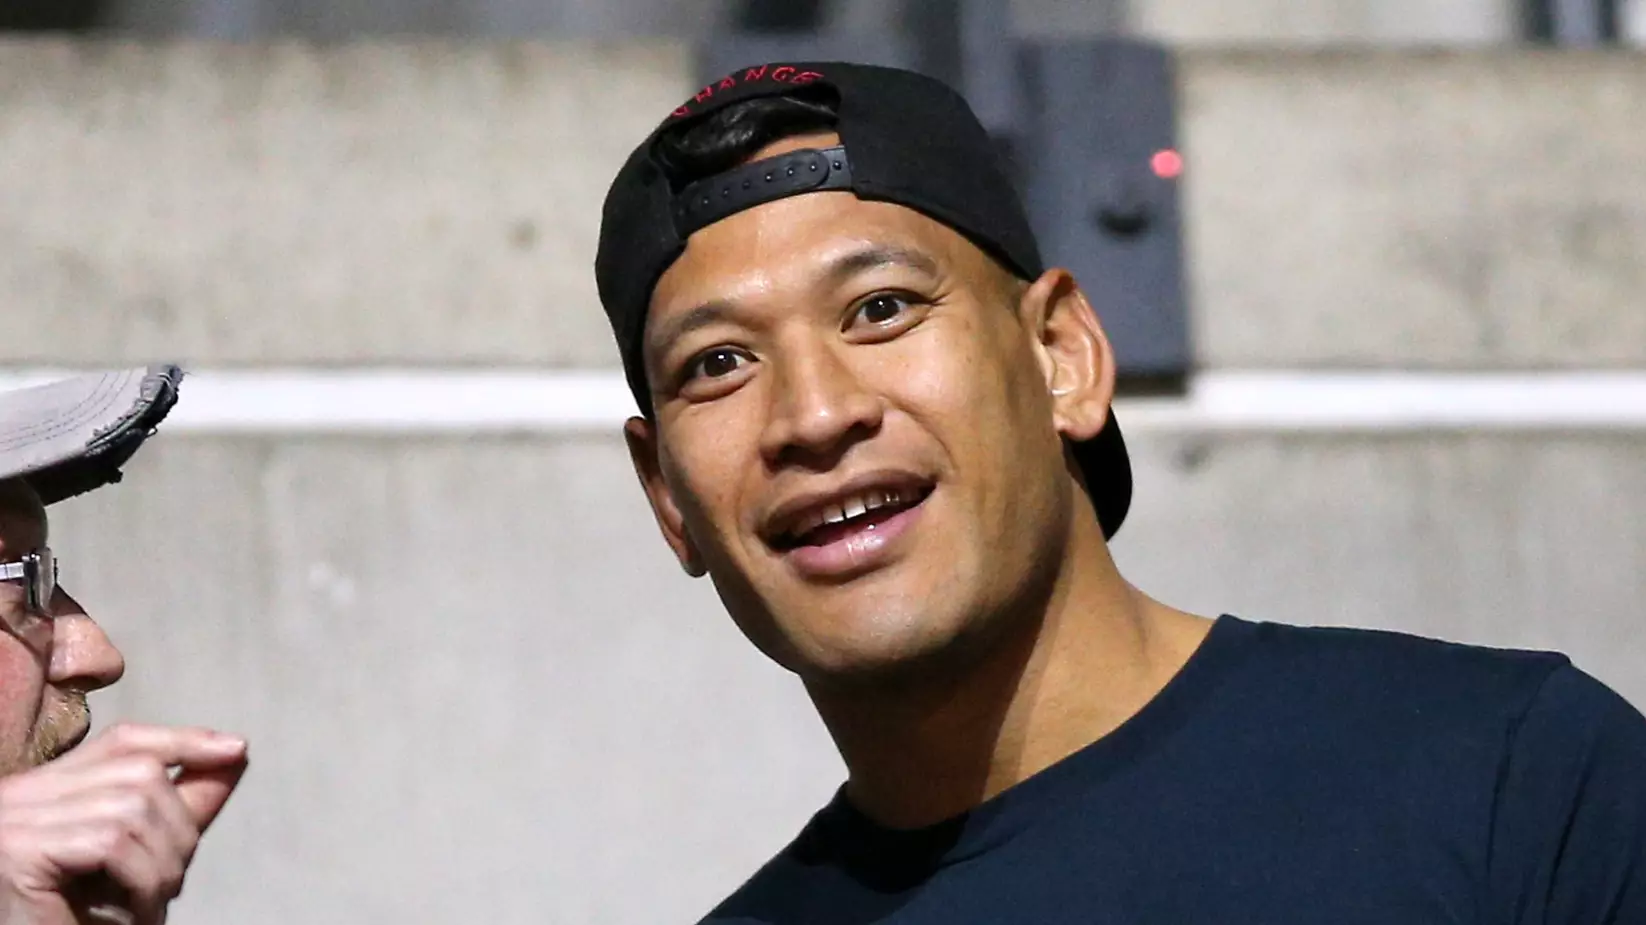 Israel Folau Settles With Rugby Australia Out Of Court